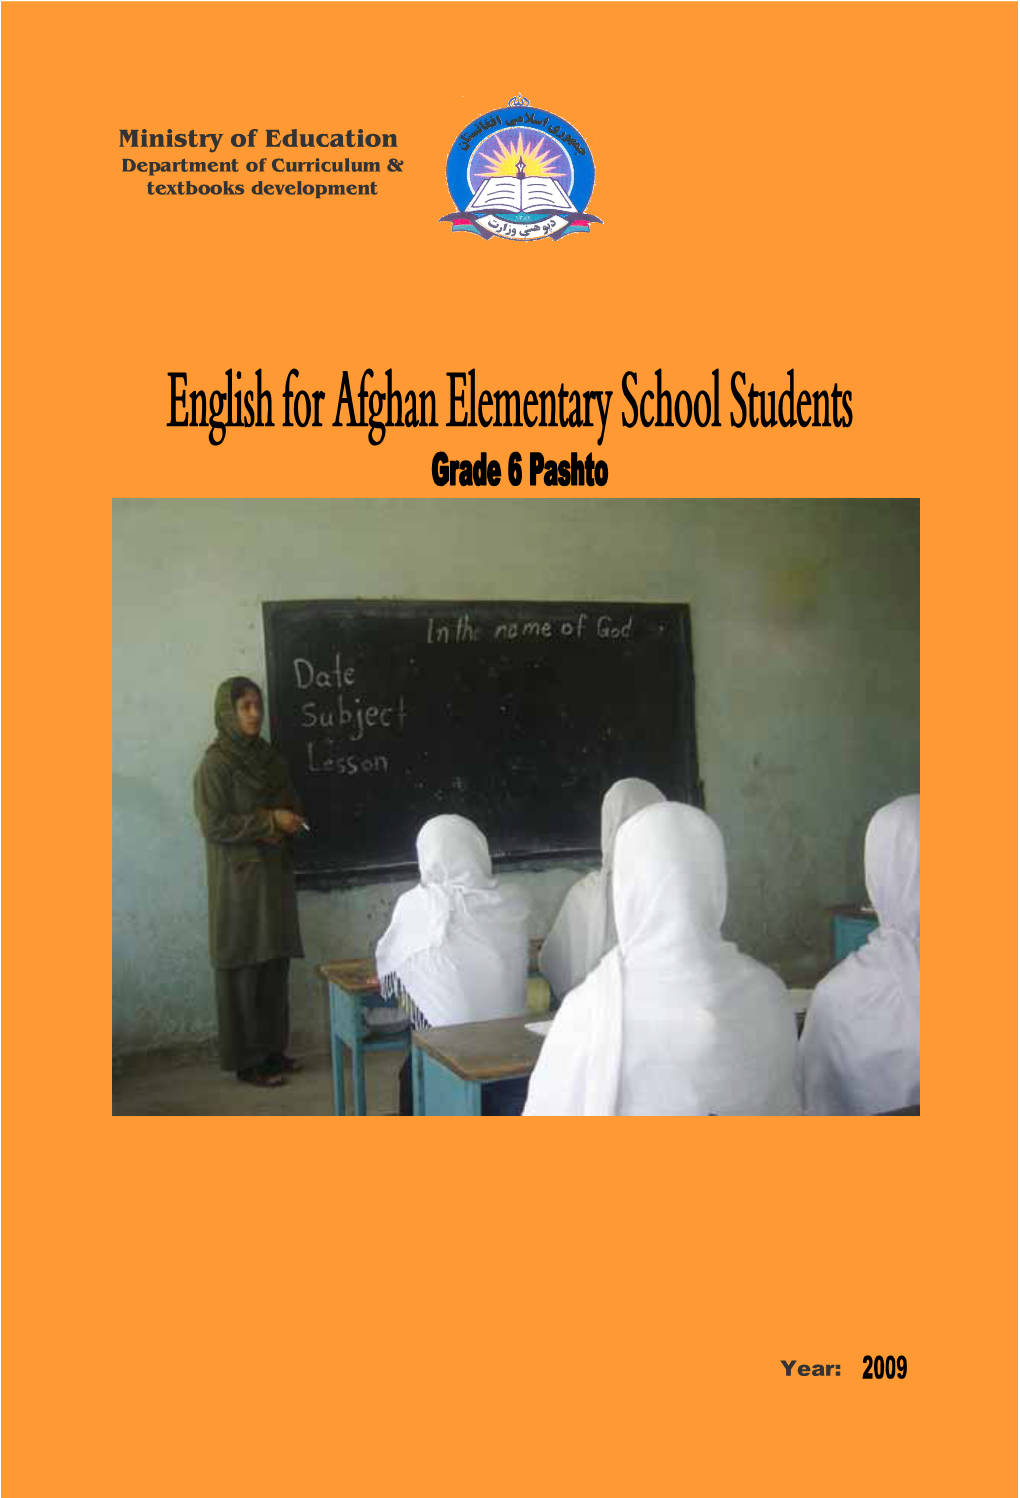 Ministry of Education Department of Curriculum & Textbooks Development